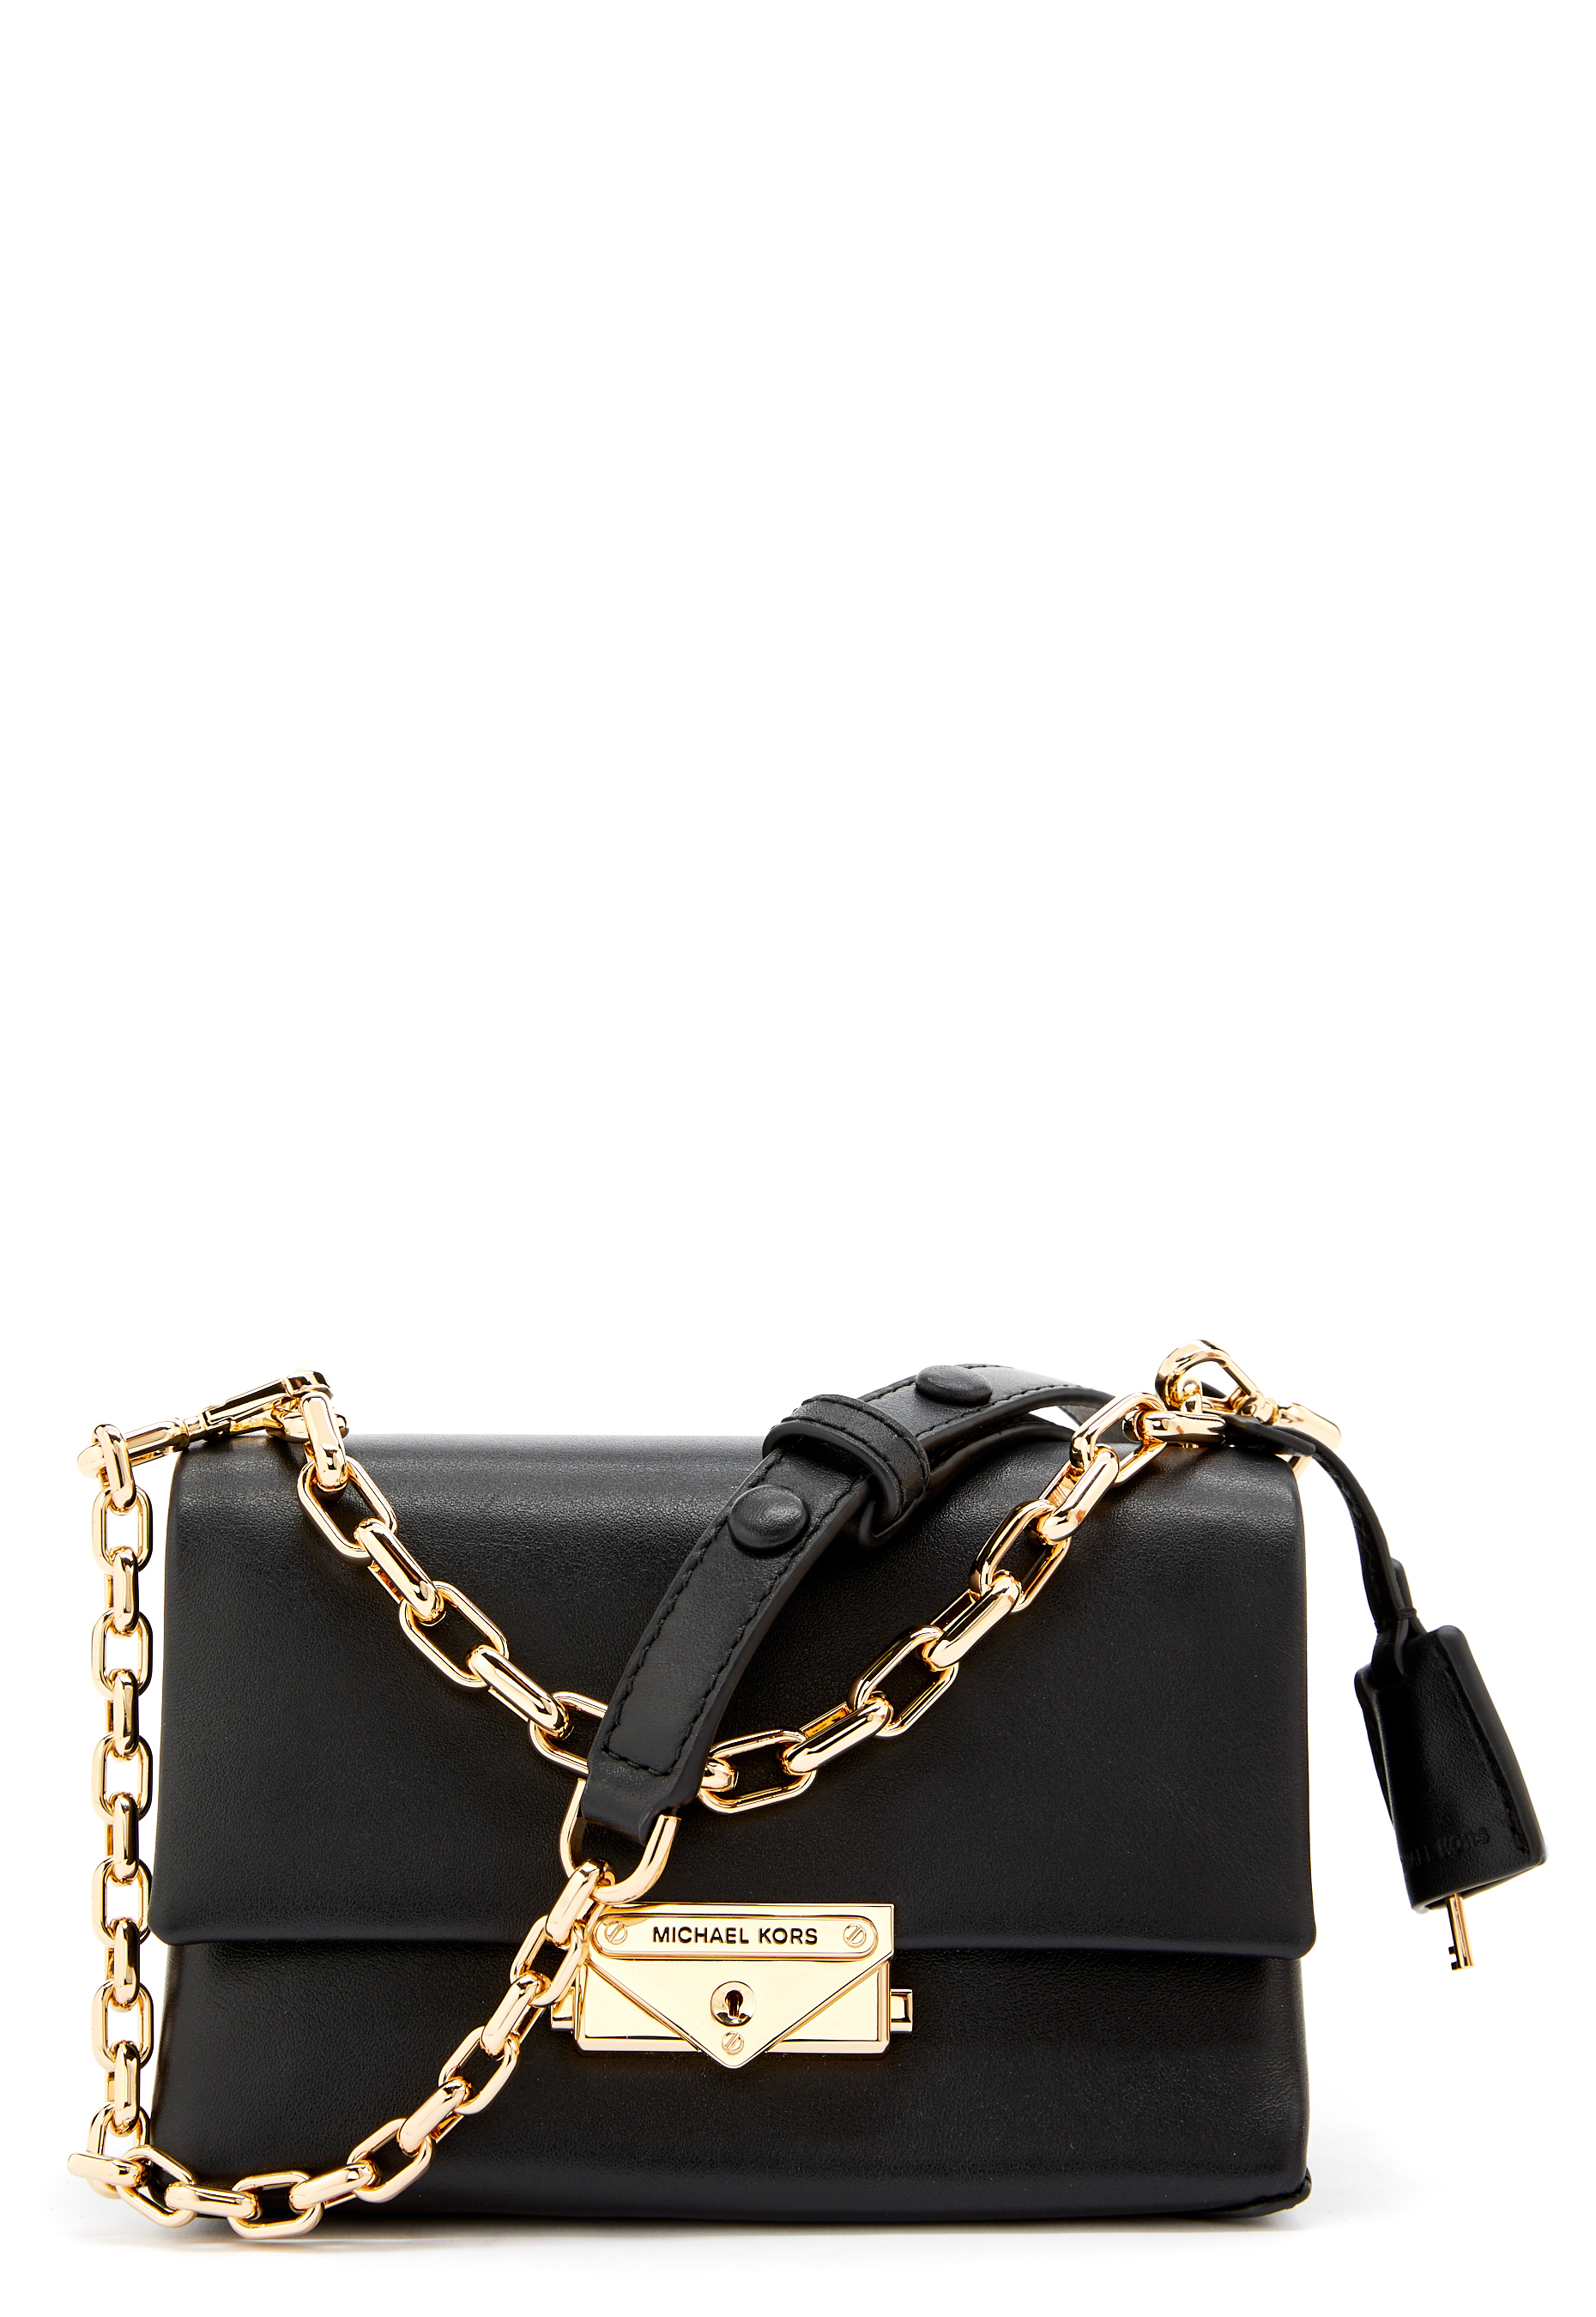 michael kors purses with chains